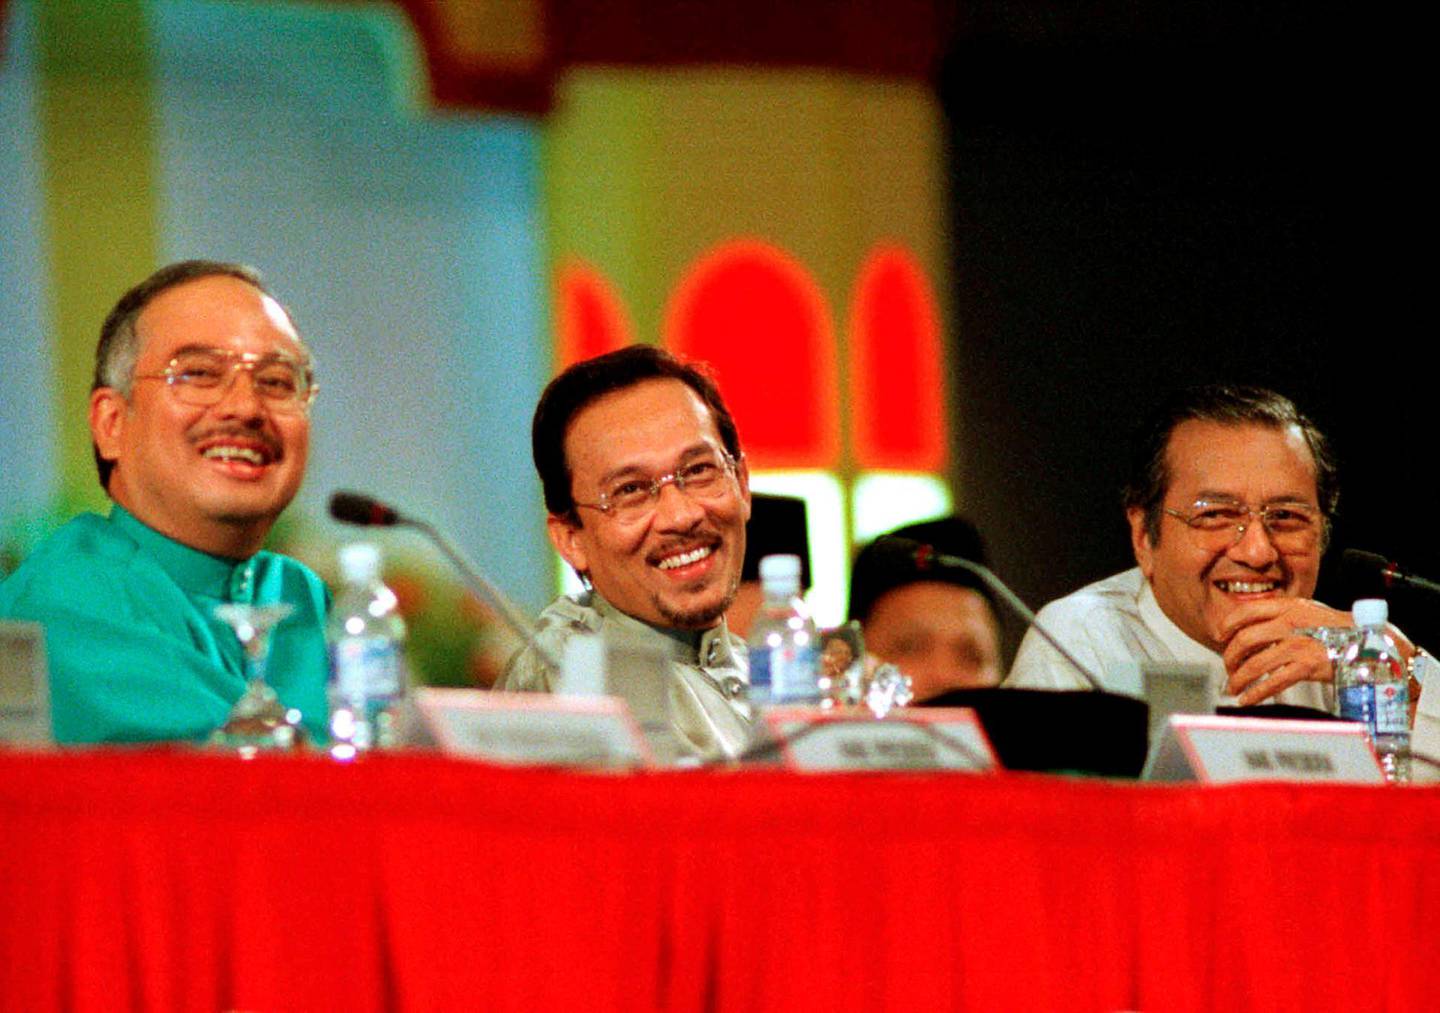 FILE PHOTO: Malaysia's Education Minister Najib Razak, Deputy Prime Minister Anwar Ibrahim and Prime Minister Mahathir Mohamad (L-R) laugh at a joke by one of the delegates during the United Malays National Organisation's (UMNO) annual general assembly in Kuala Lumpur, June 20, 1998. REUTERS/Stringer/File Photo